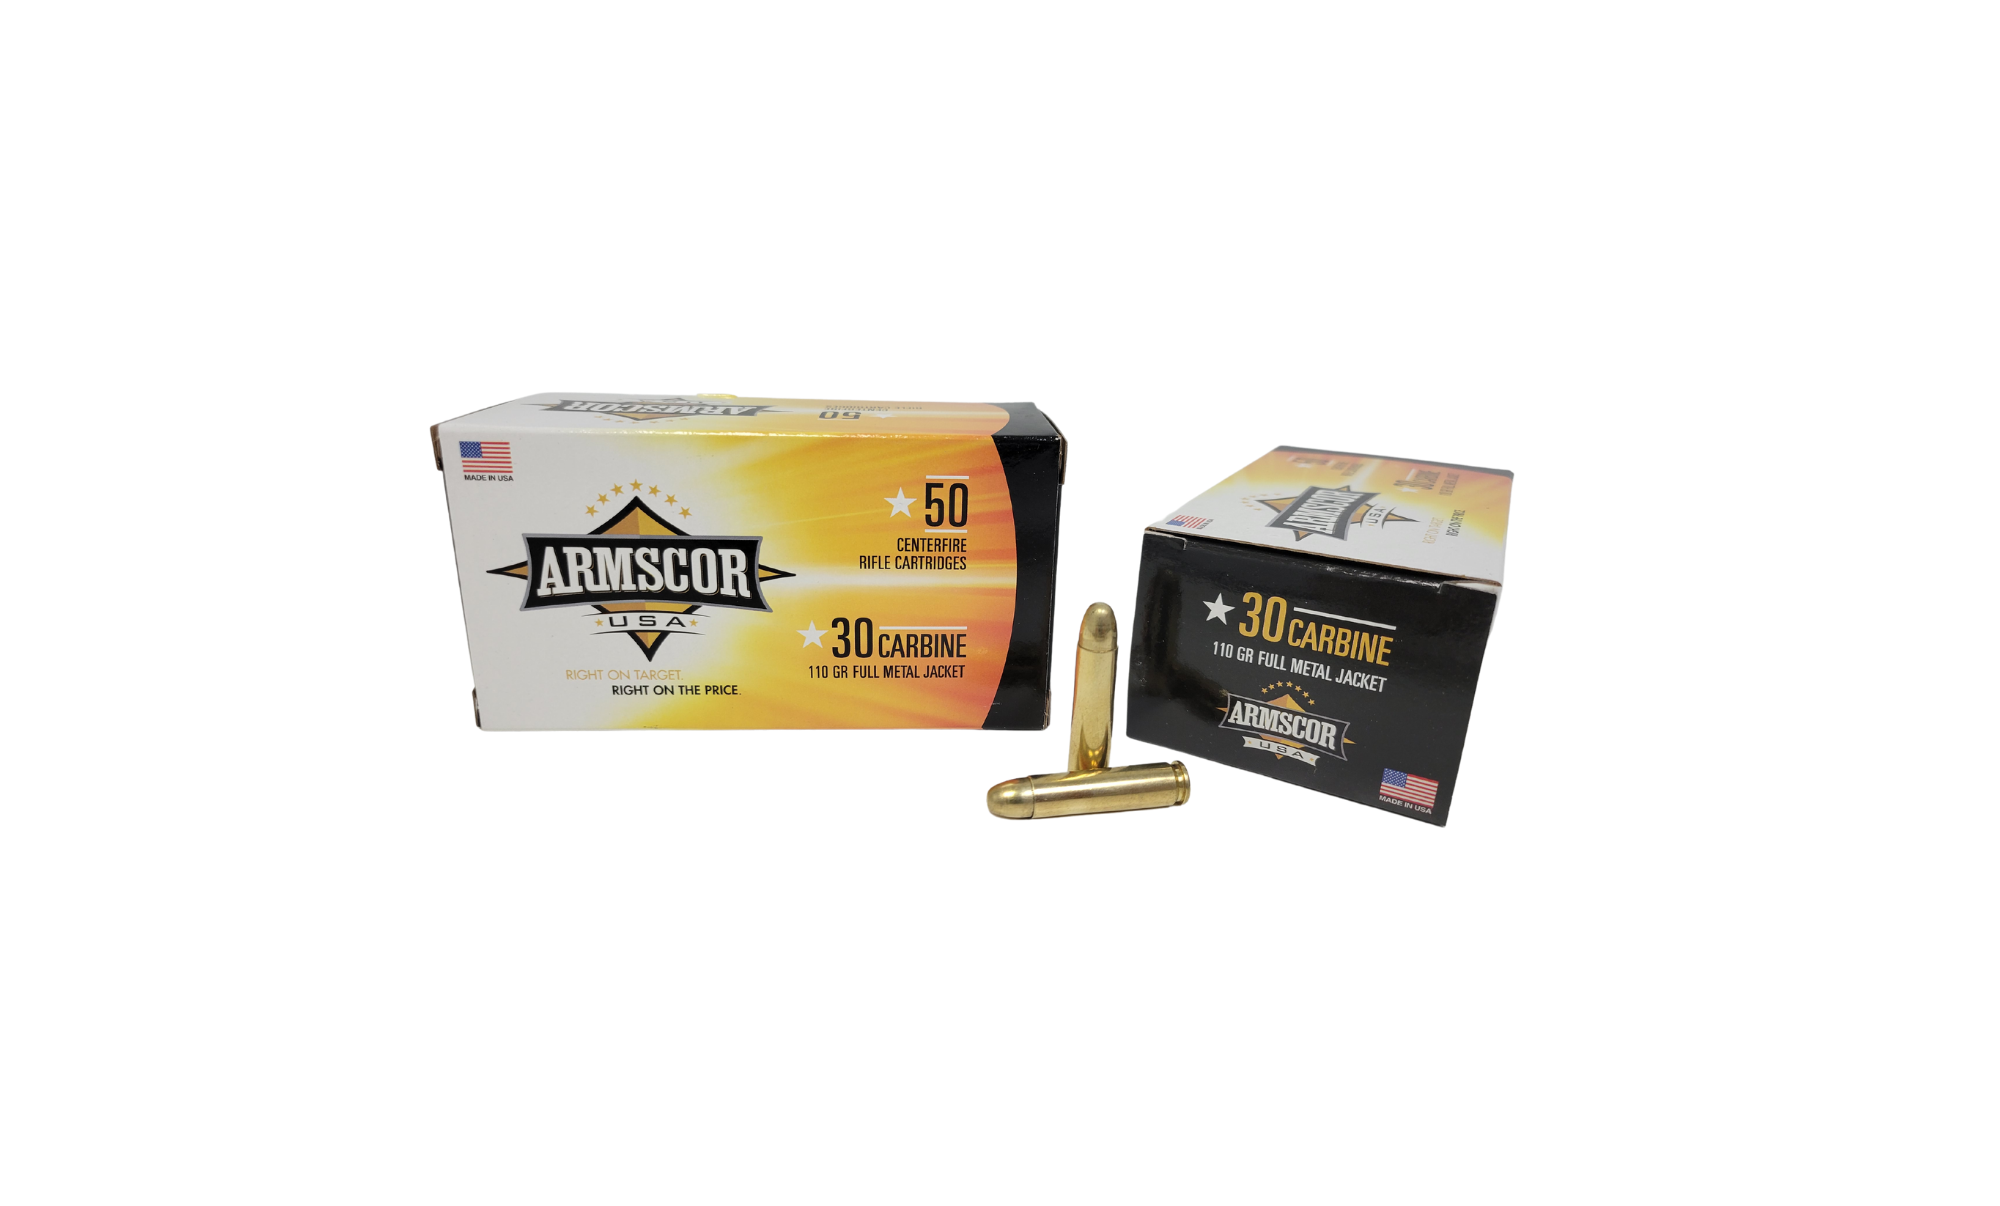 Armscor .30 Carbine SAME DAY SHIPPING 110 Grain FMJ - 50 Rounds (Box) [NO TAX outside Texas] FREE SHIPPING OVER $199